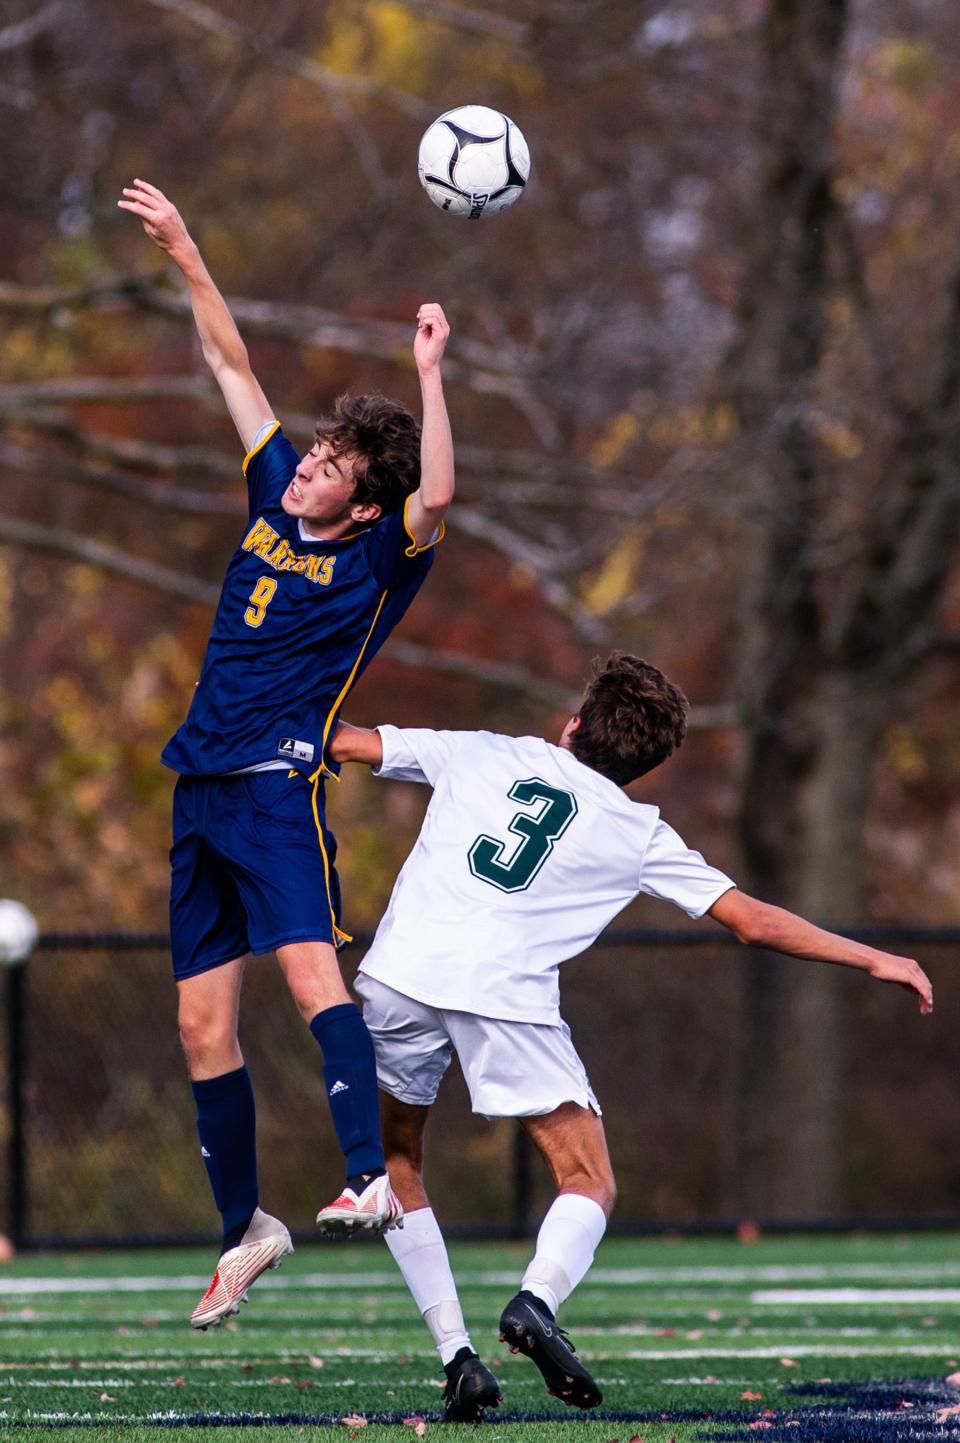 Lourdes' Anthony Geis heads the ball during the boys Class C regional soccer game in Beacon on Saturday, November 5, 2022.